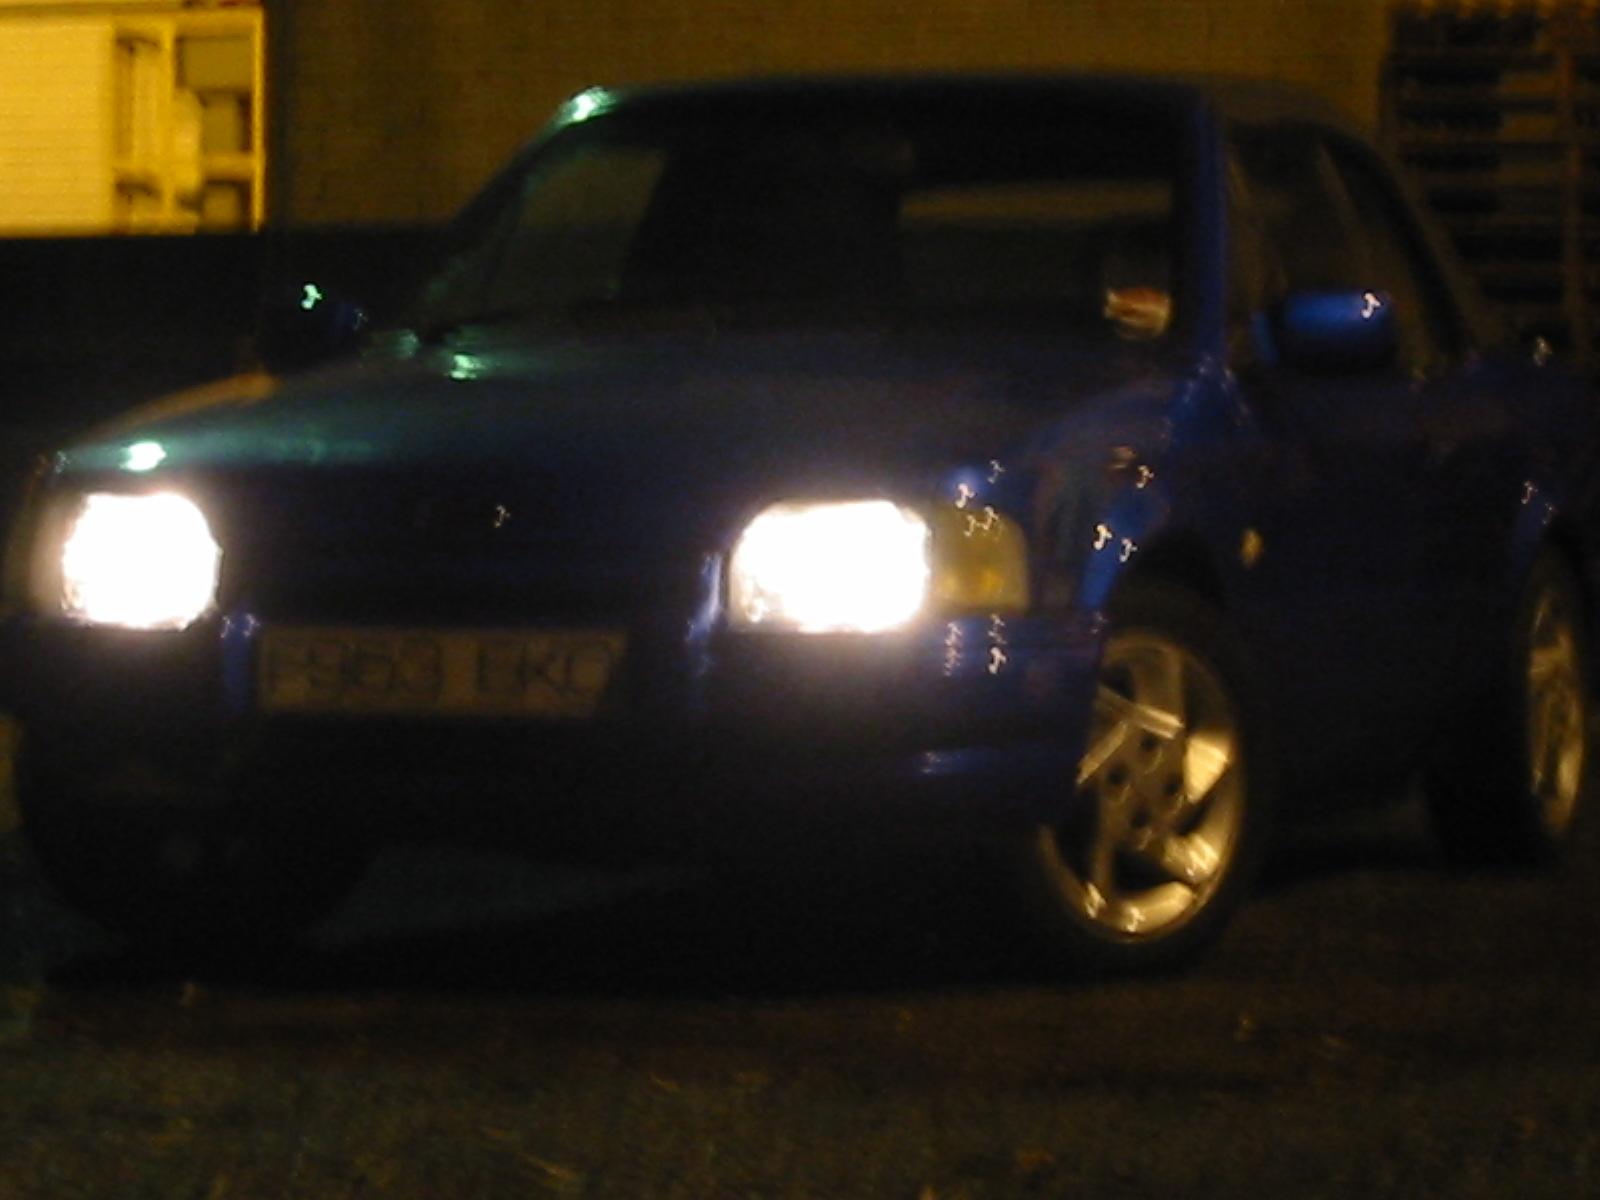 a close up view of a car with headlights on